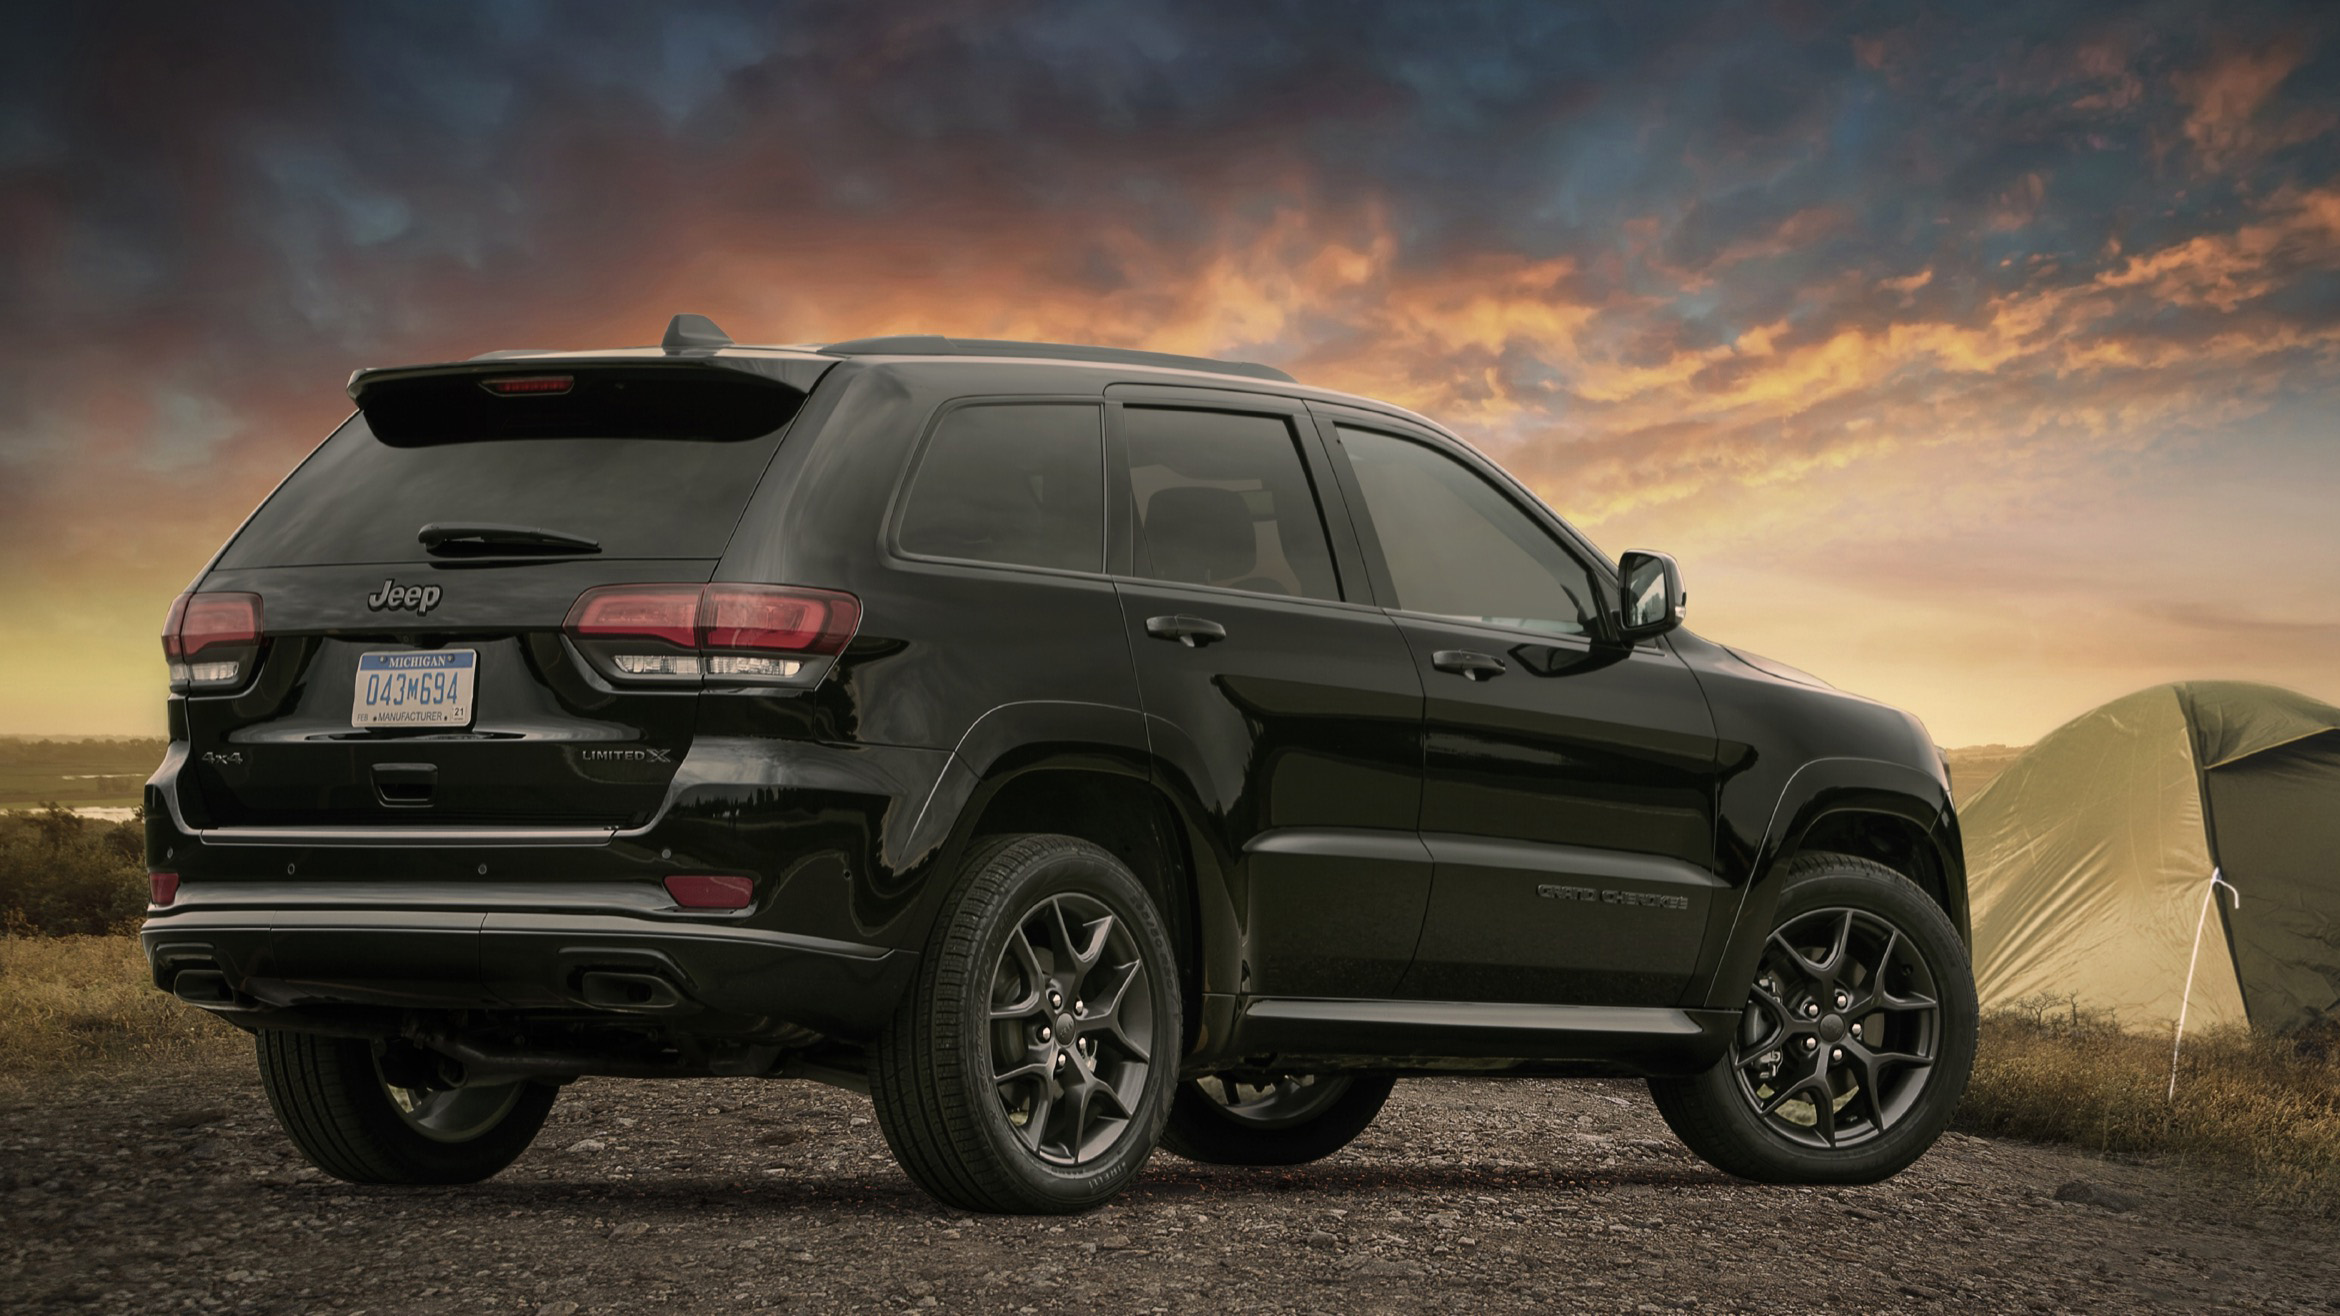 2020 Jeep Grand Cherokee Review | Pricing, specs, safety, photos - Autoblog